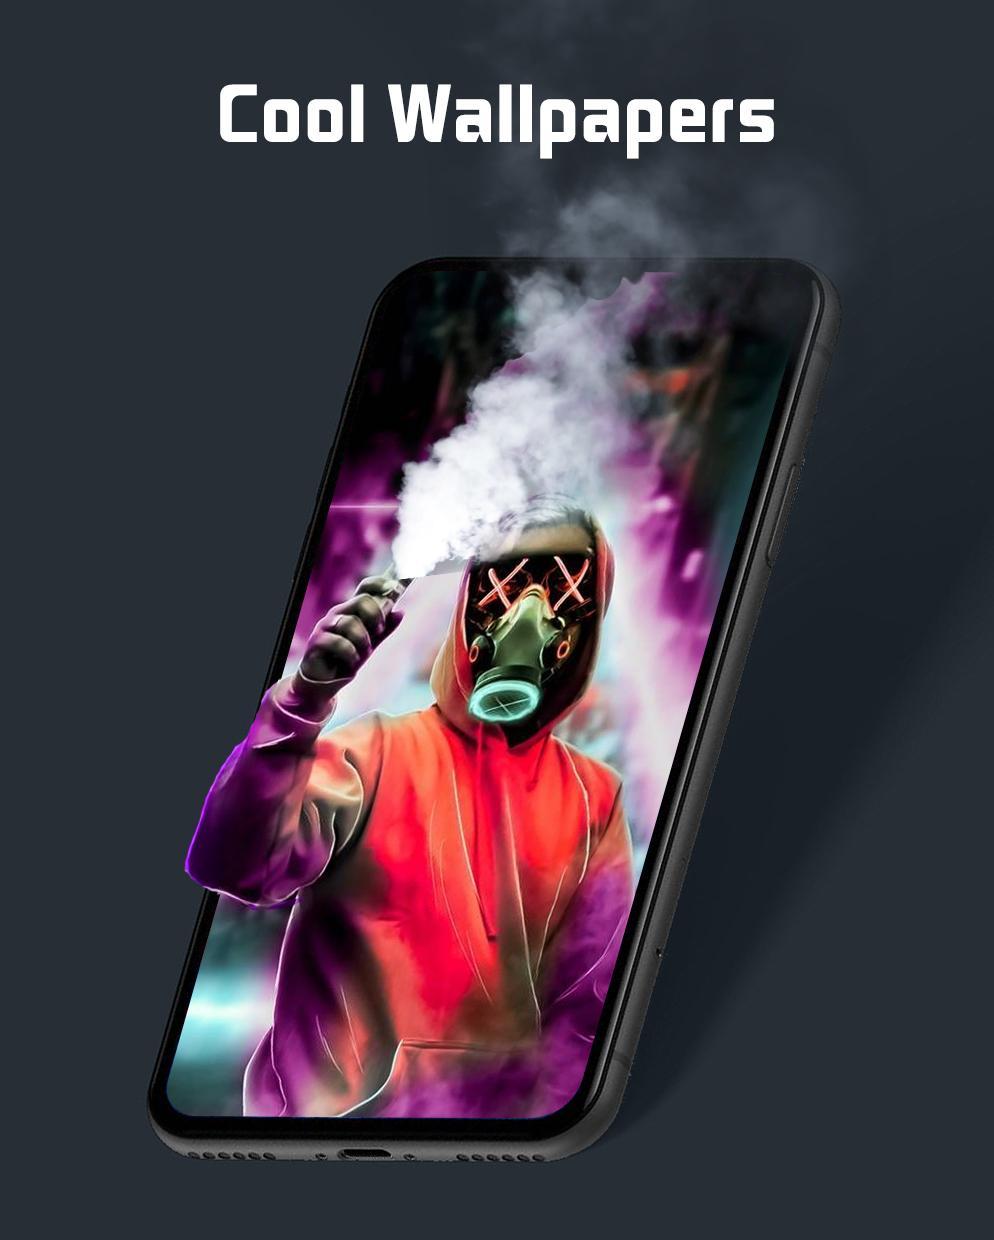 3d Live Wallpapers Hd 4k Lockscreen Background For Android Apk Download